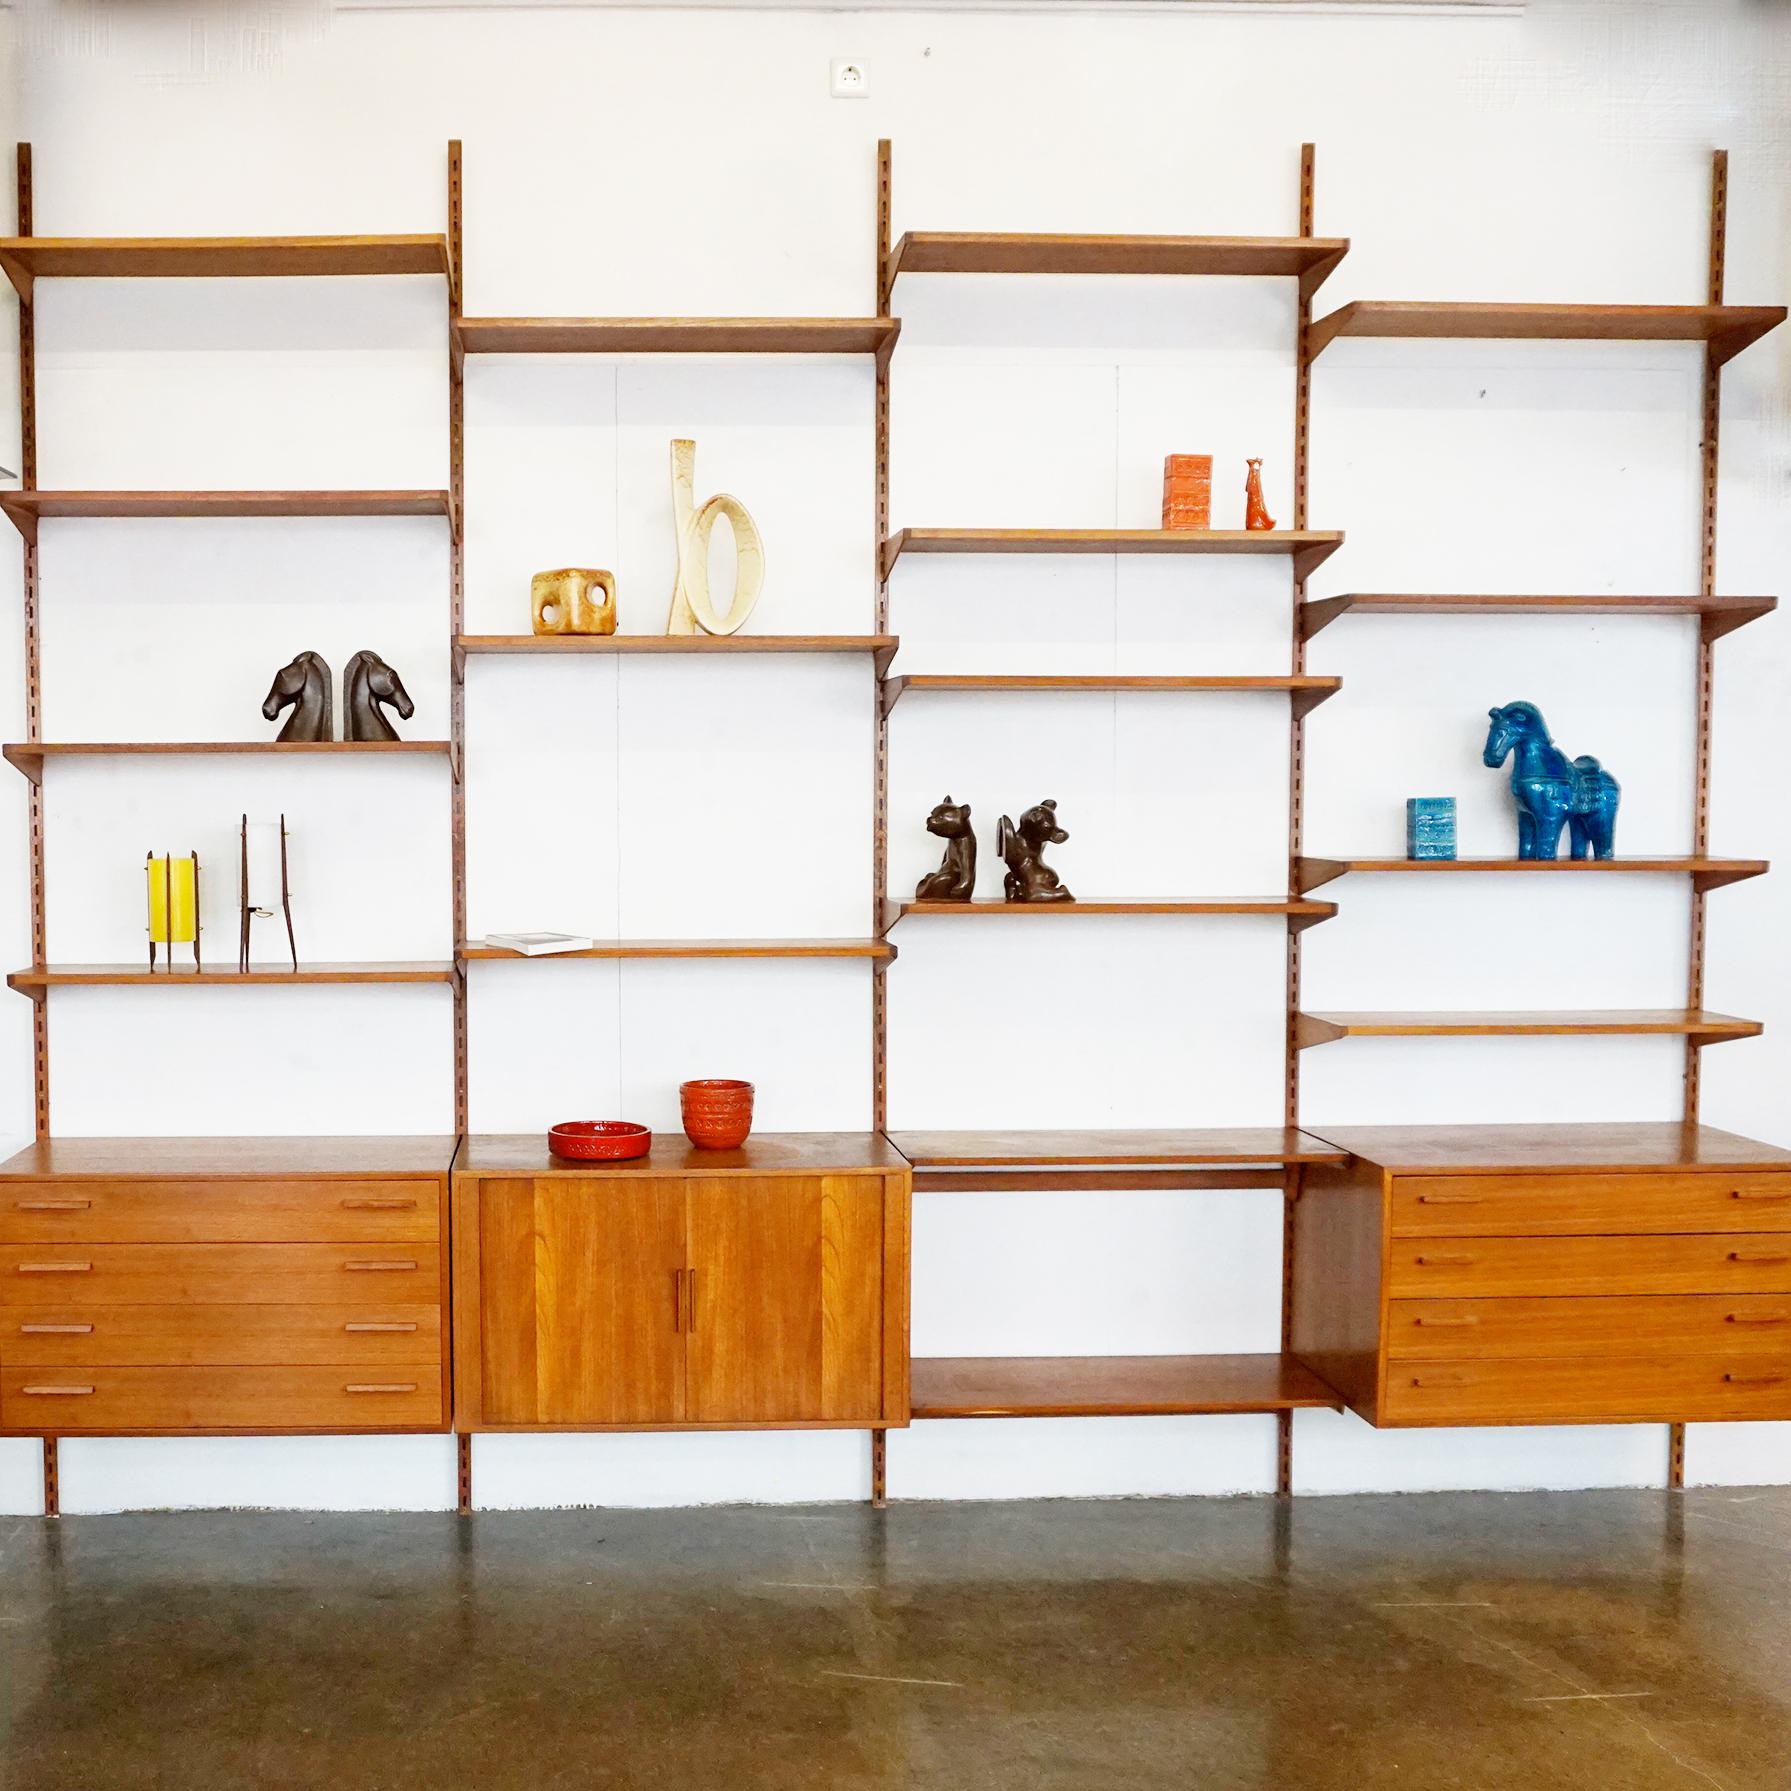 This stunning Danish modern style wall system has been designed by Kai Kristiansen in the 1960s and is made of teakwood. Kai Kristiansen was a real craftsman, this wall system shows it all.
It consists of two cabinets with drawers, one with tambour